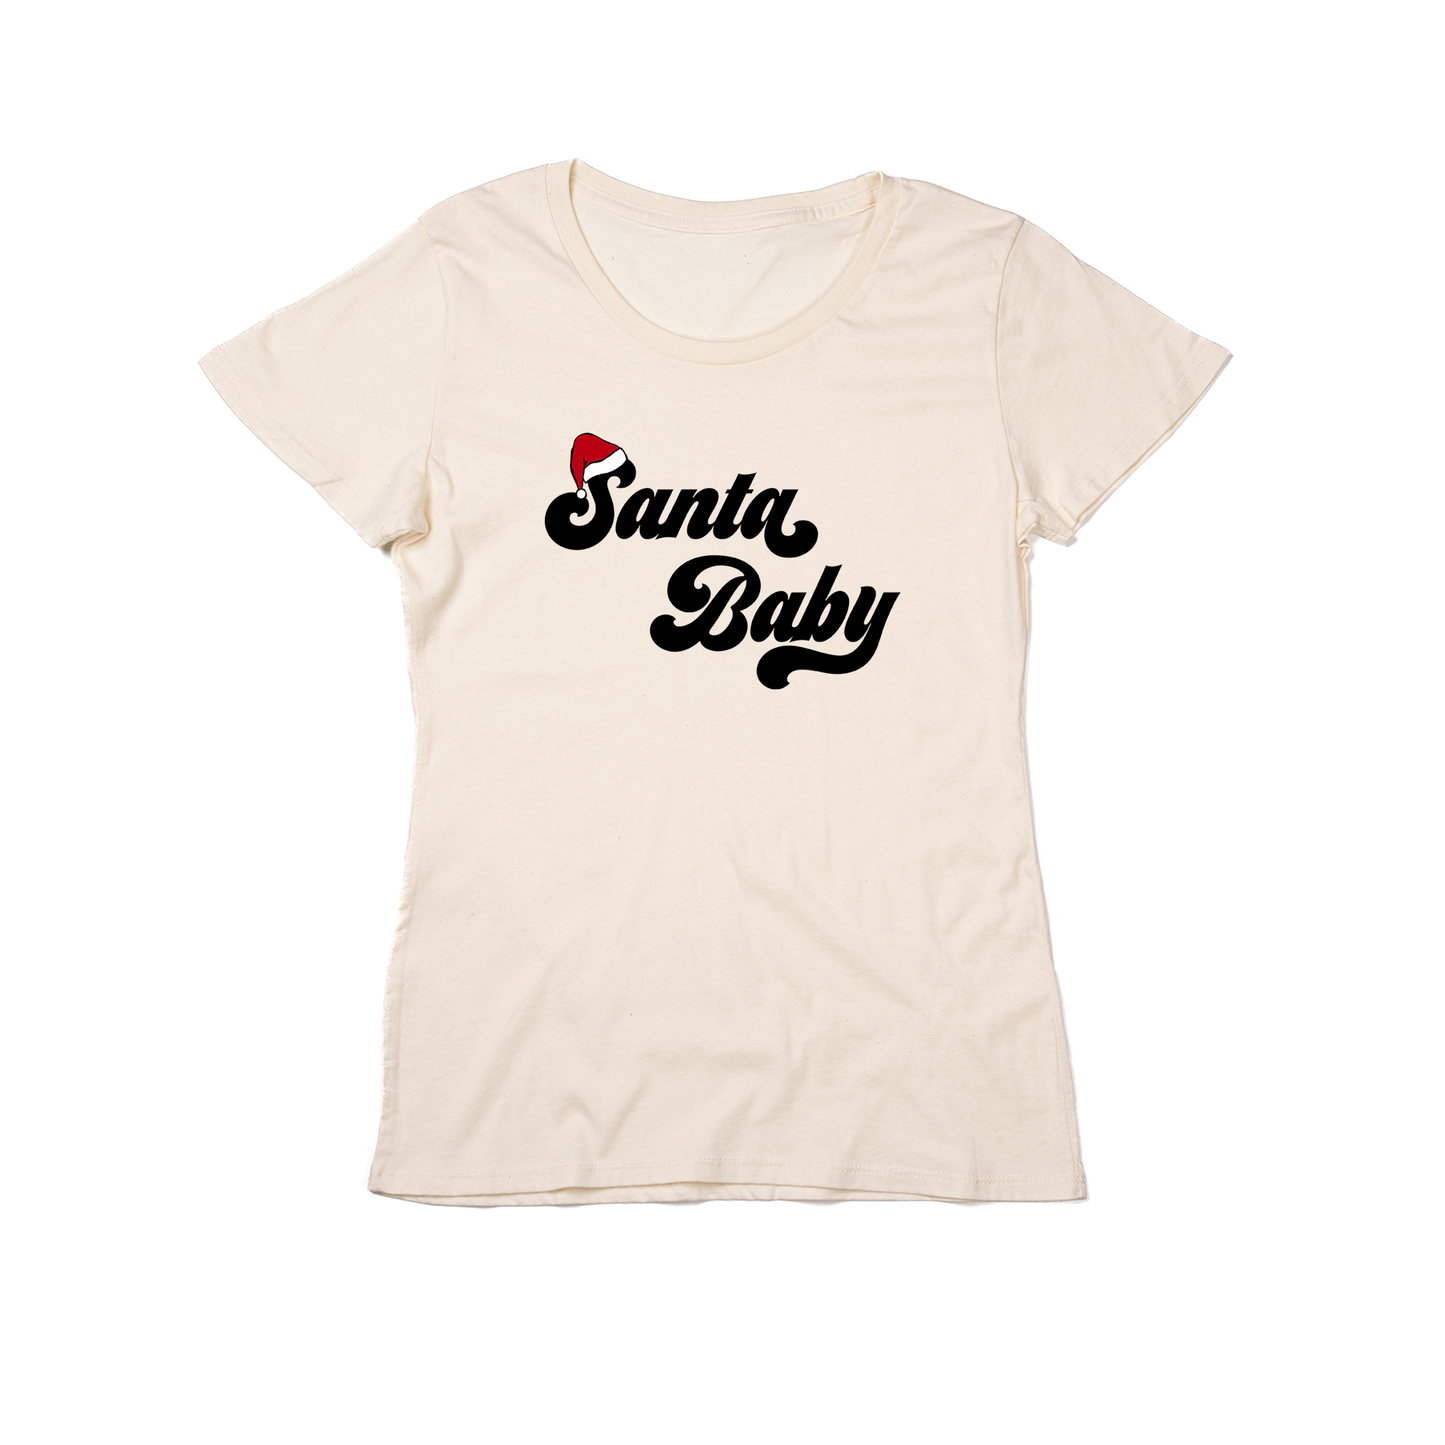 Santa Baby - Women's Fitted Tee (Natural)